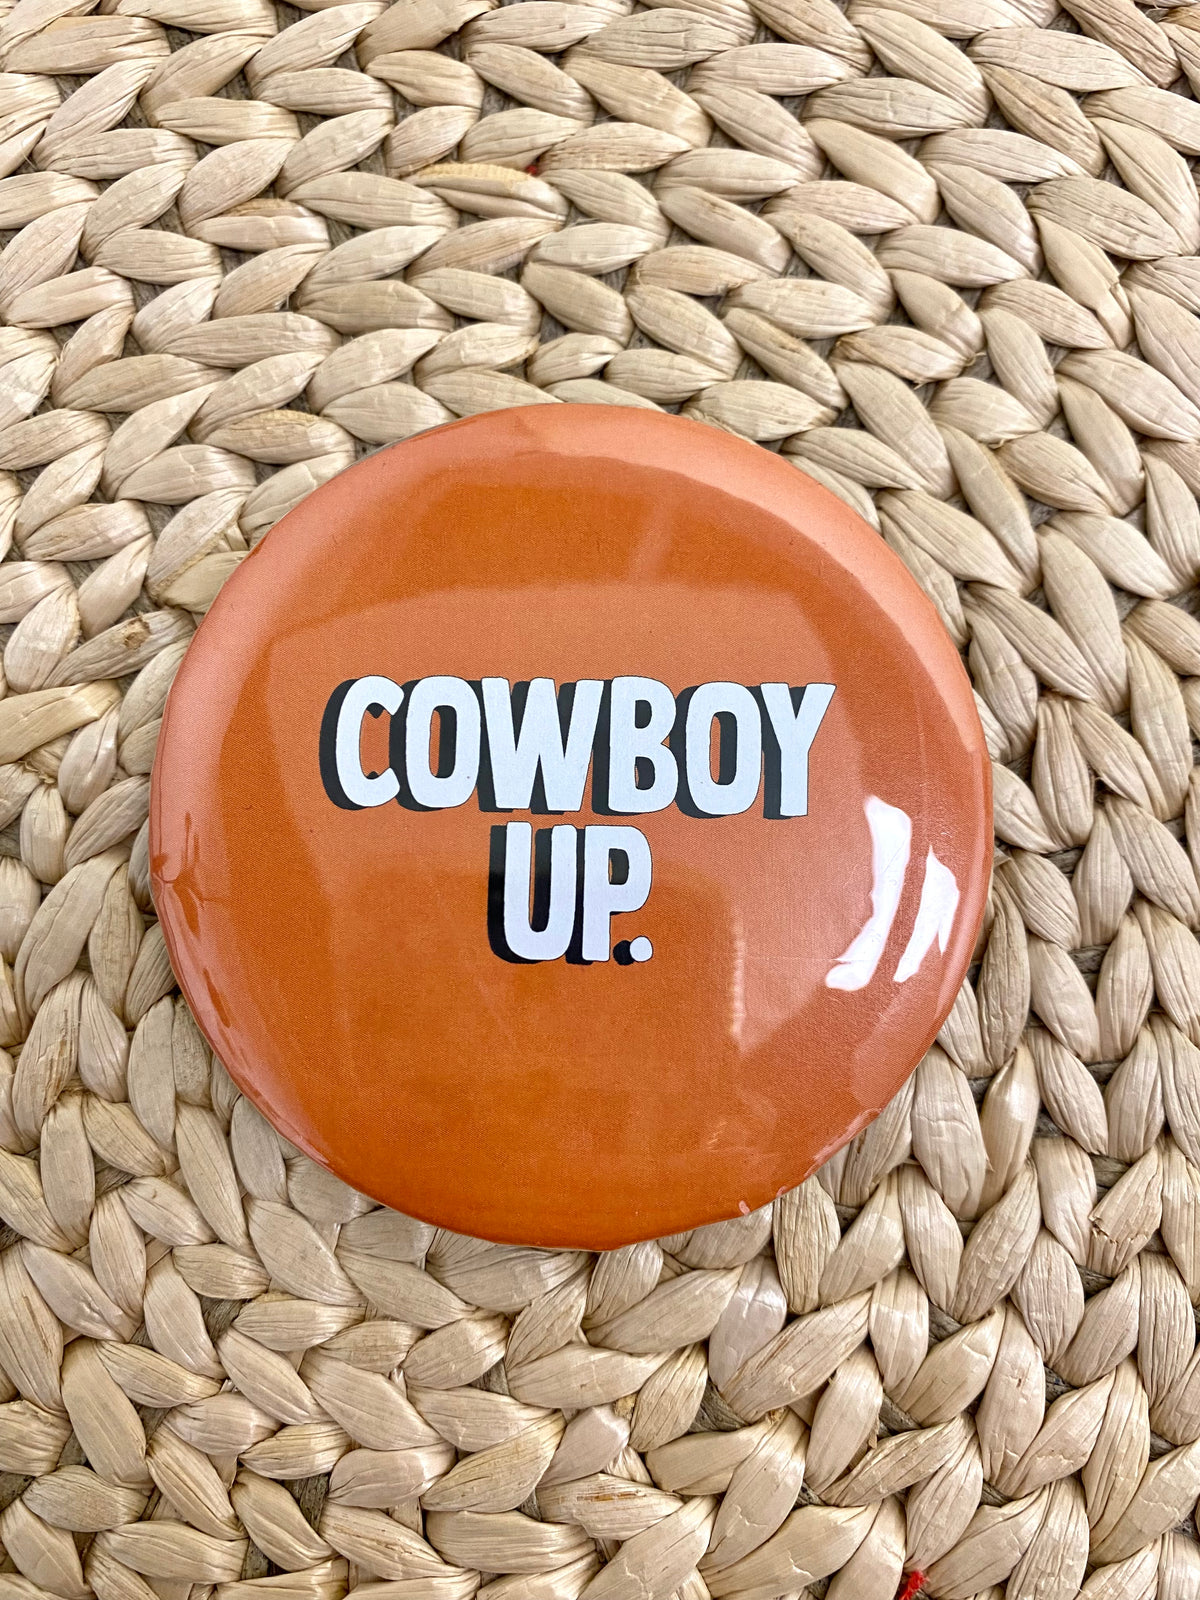 Cowboy Up 3 inch button orange - Trendy Gifts at Lush Fashion Lounge Boutique in Oklahoma City